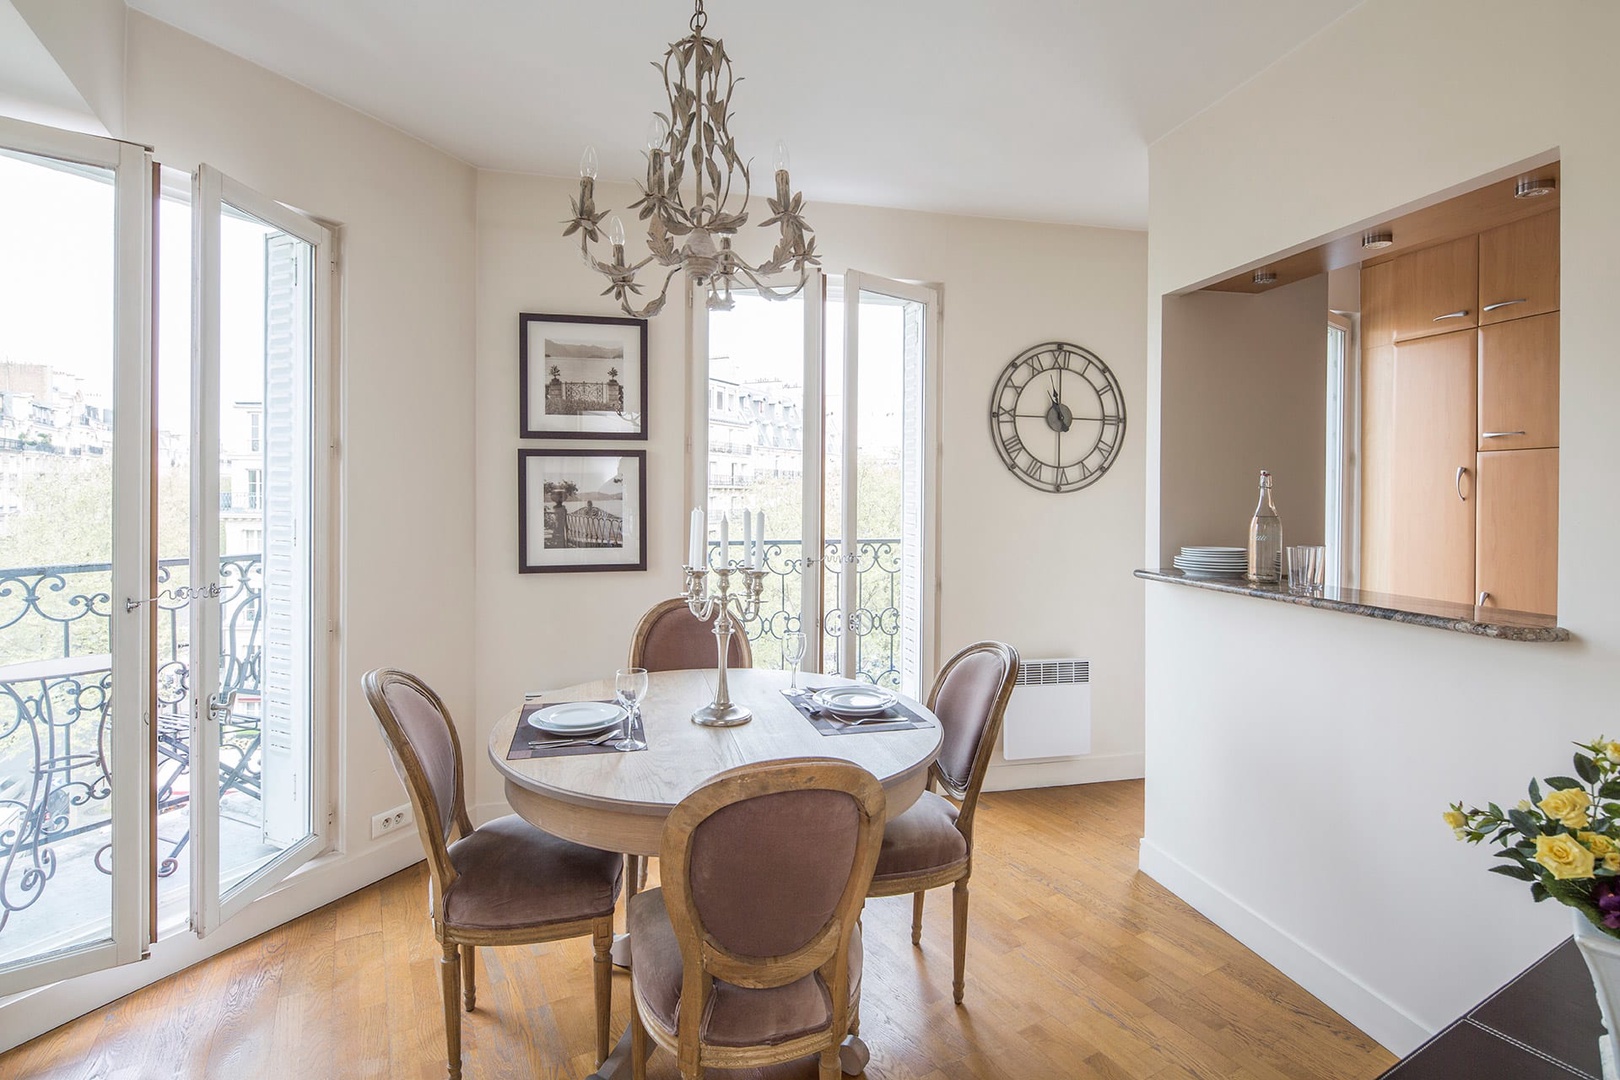 The dining area has the ideal romantic atmosphere for enjoying French cuisine at home.